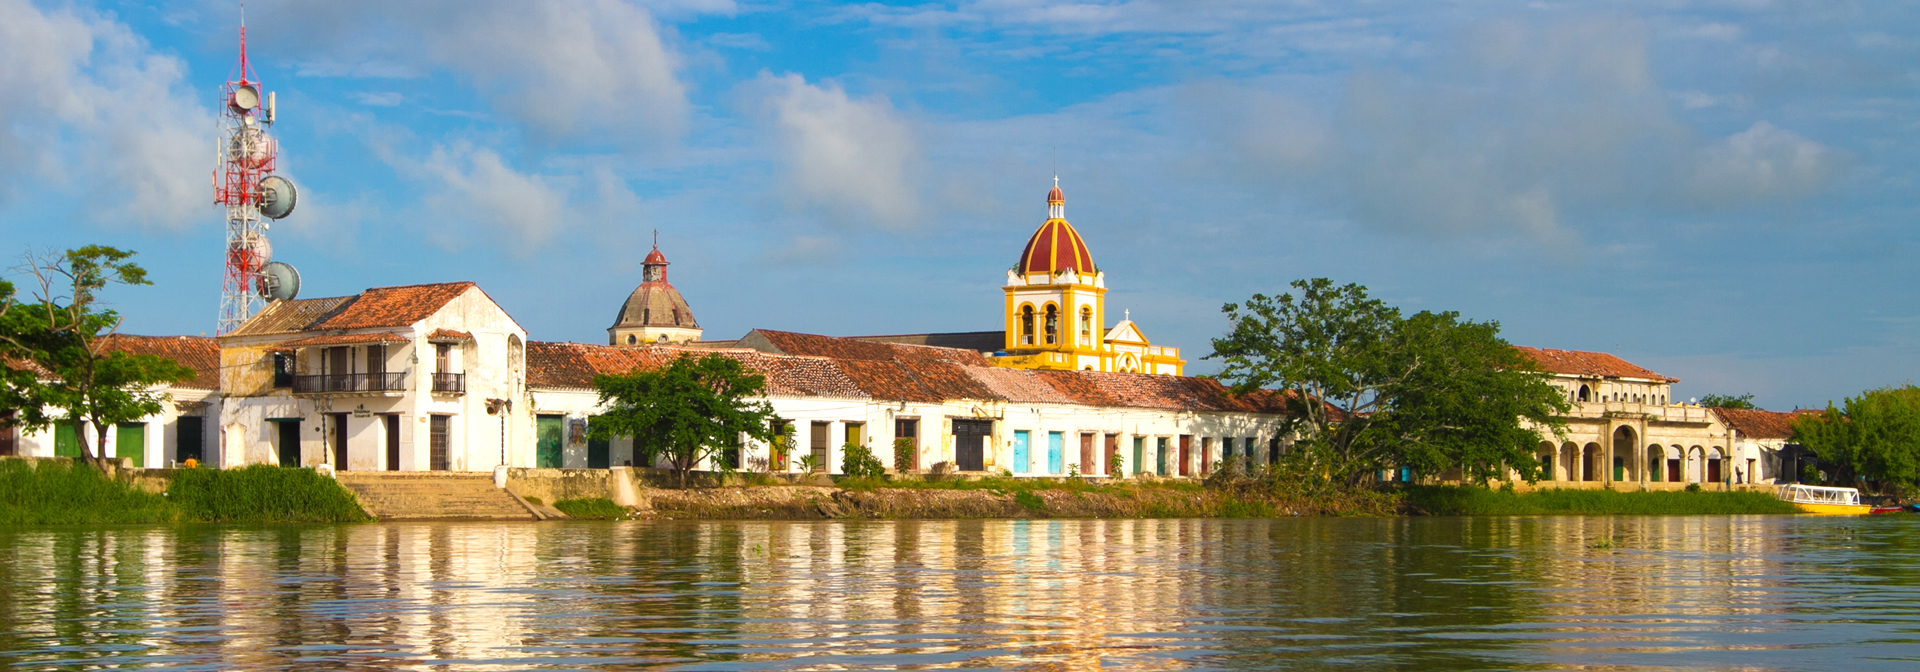 colombia - mompox_flod_01